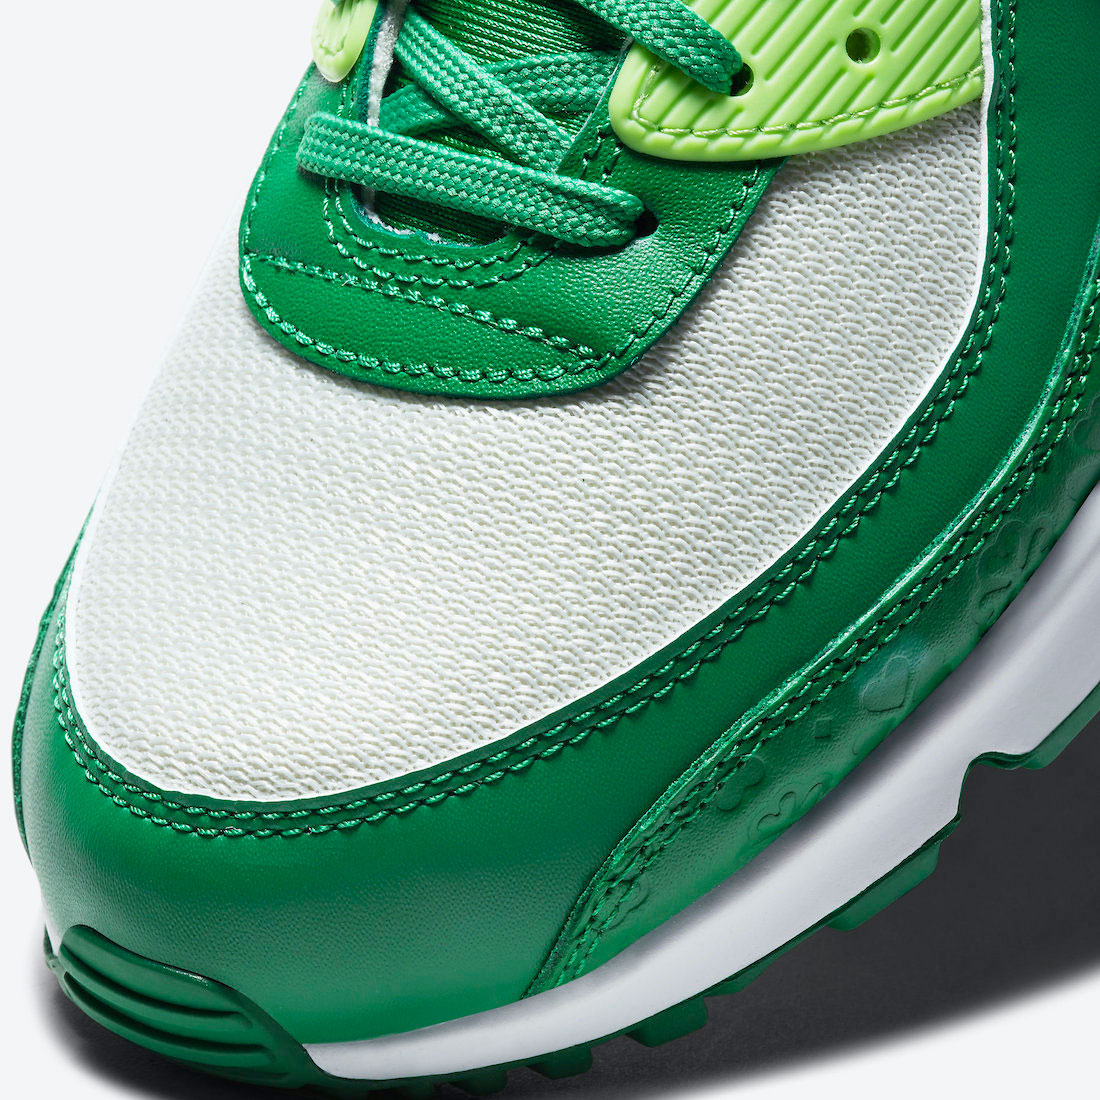 nike-air-max-90-st-patricks-day-2021-release-date-price-where-to-buy-7